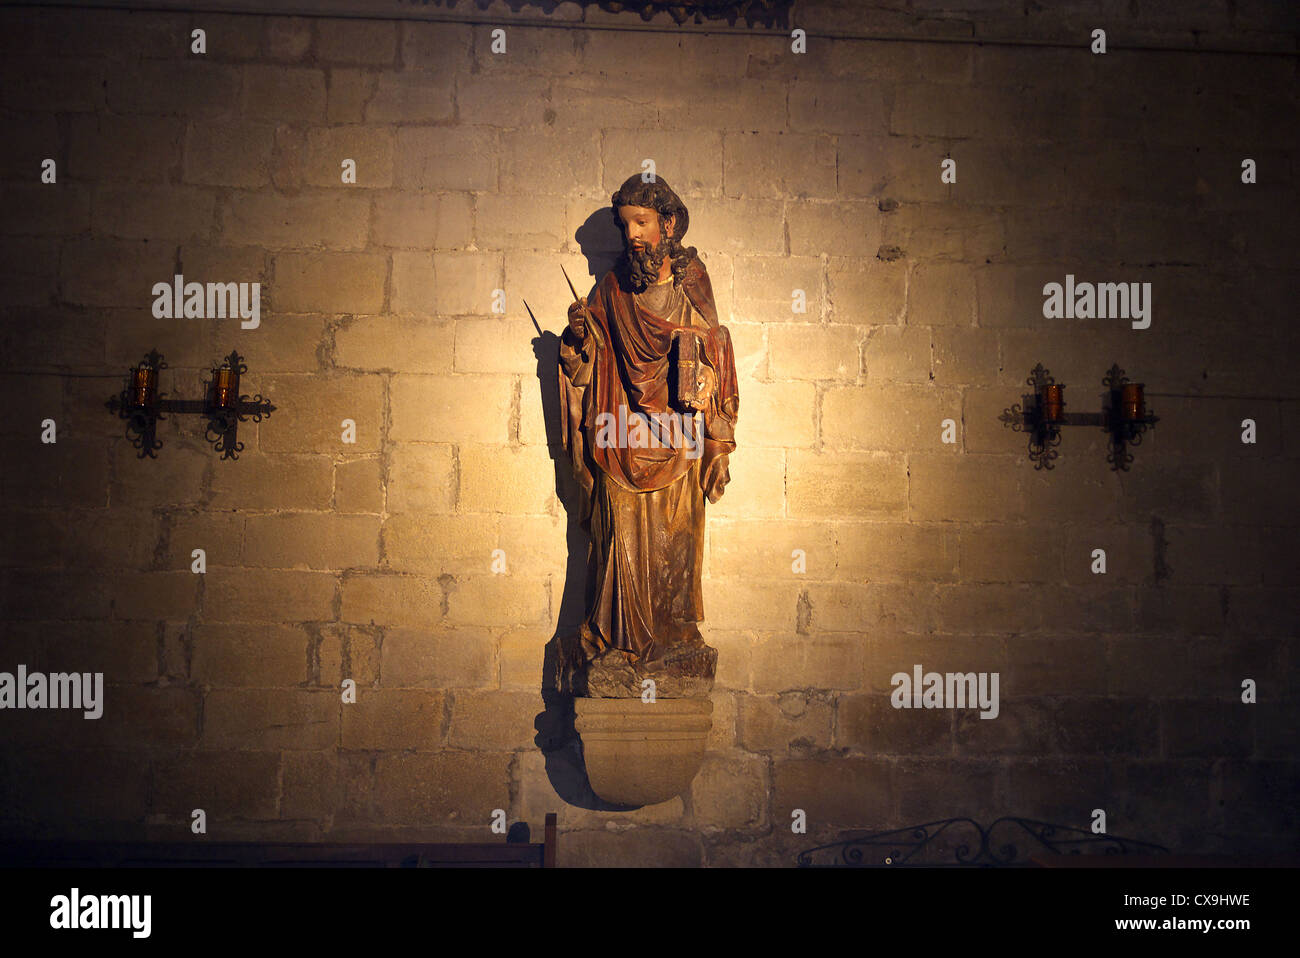 Religious sculpture in a Spanish church. Stock Photo